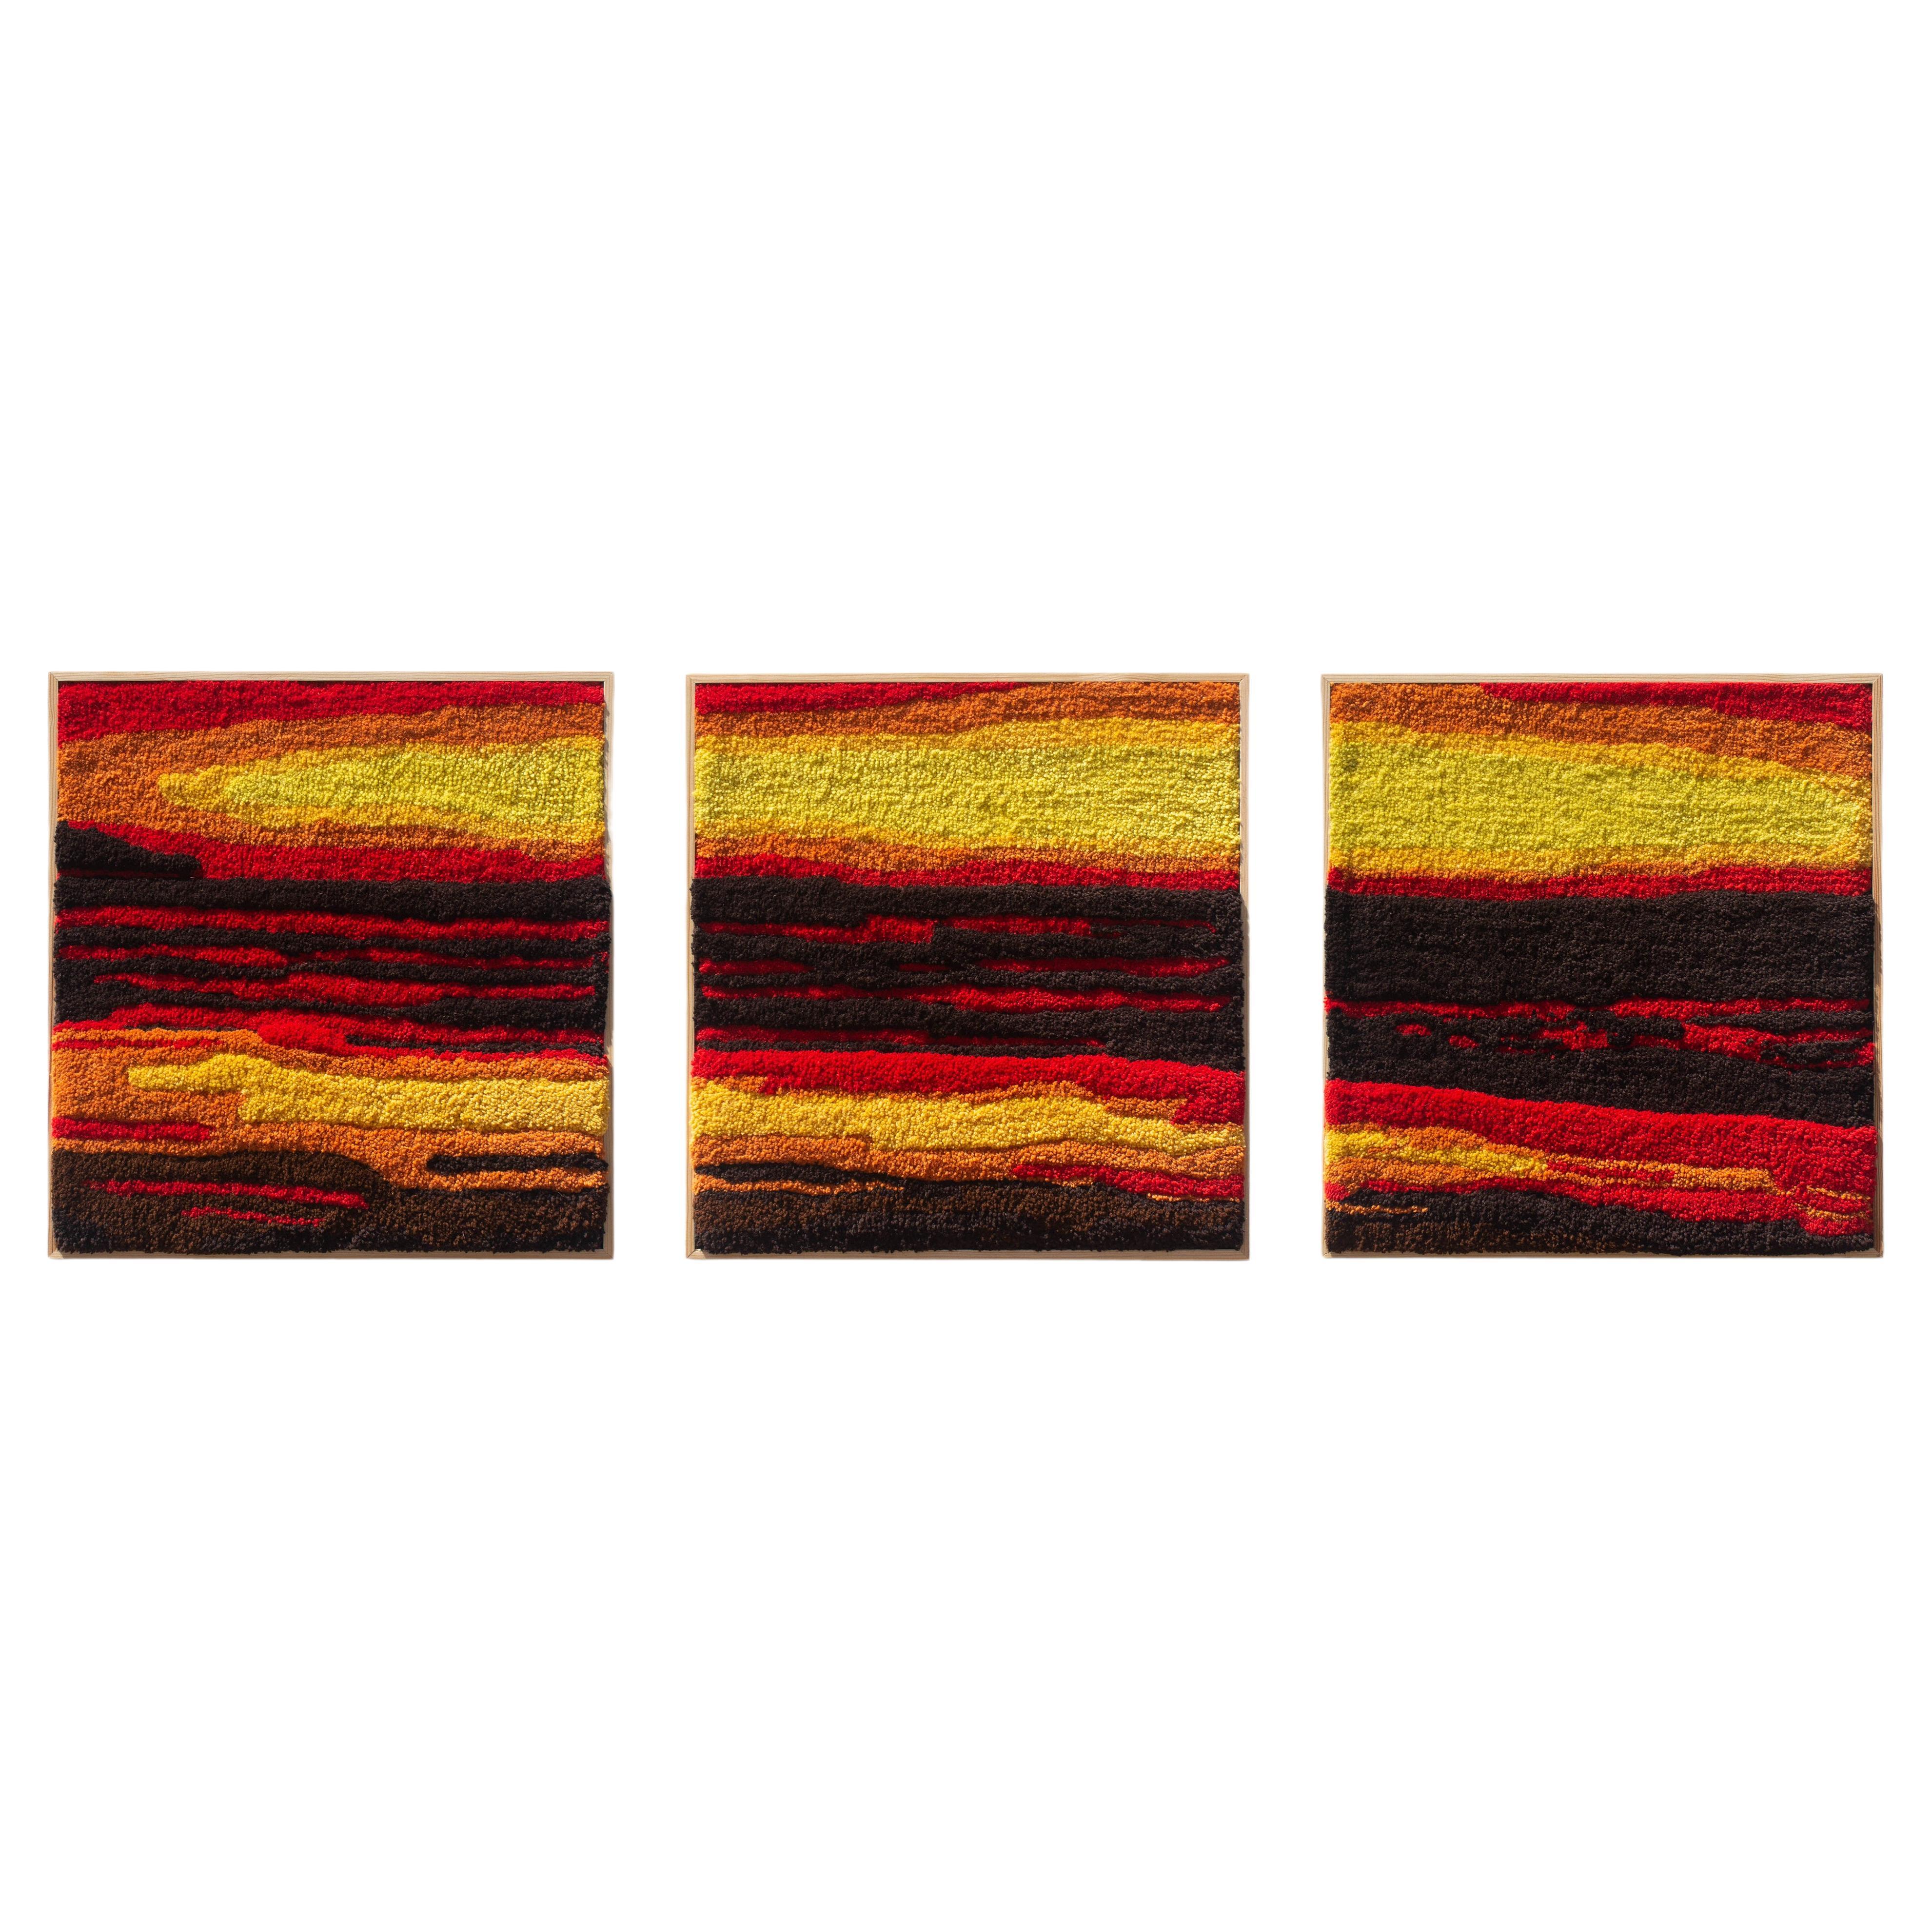 Handmade Contemporary Wool Wall Tapestry, Golden Hour Triptych, Beach Sunset  For Sale